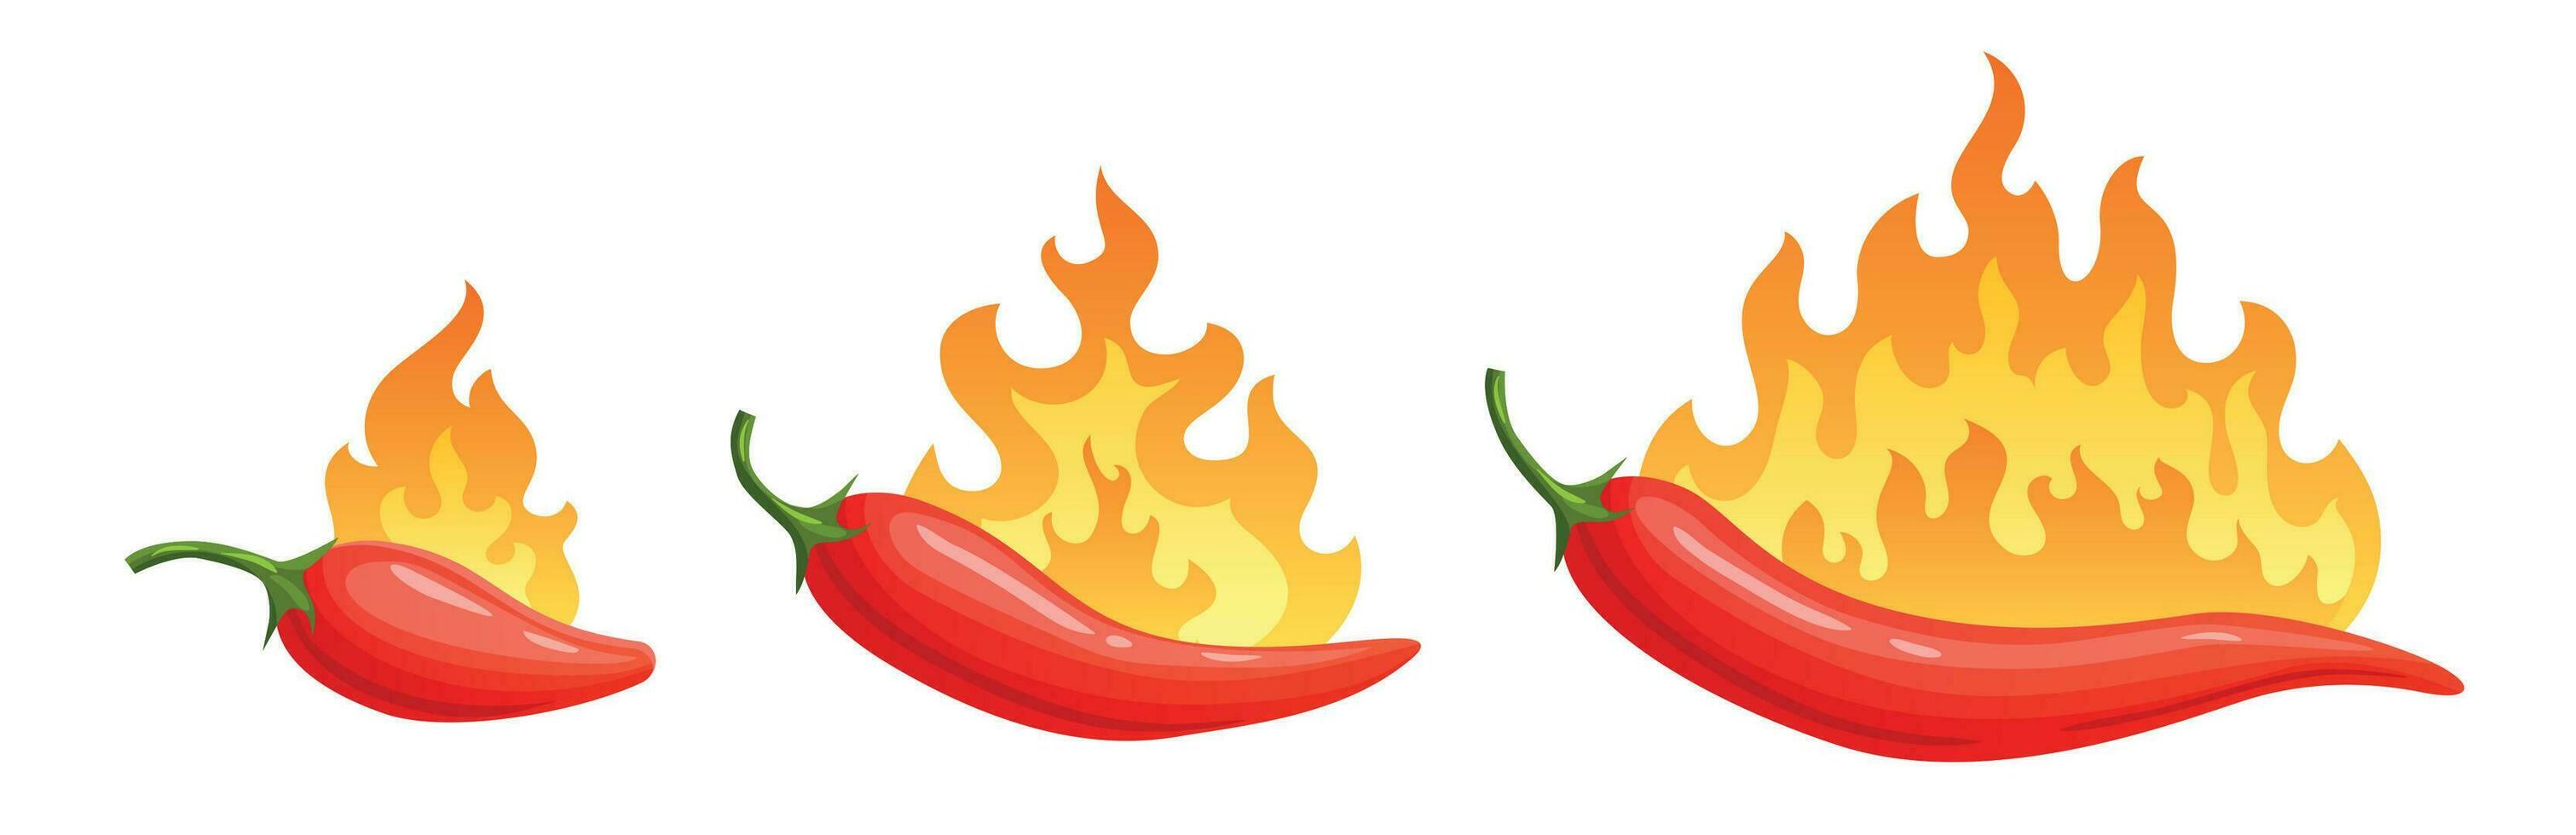 Cartoon hot peppers. Spicy pepper with fire flames and flames red chili vector icons set